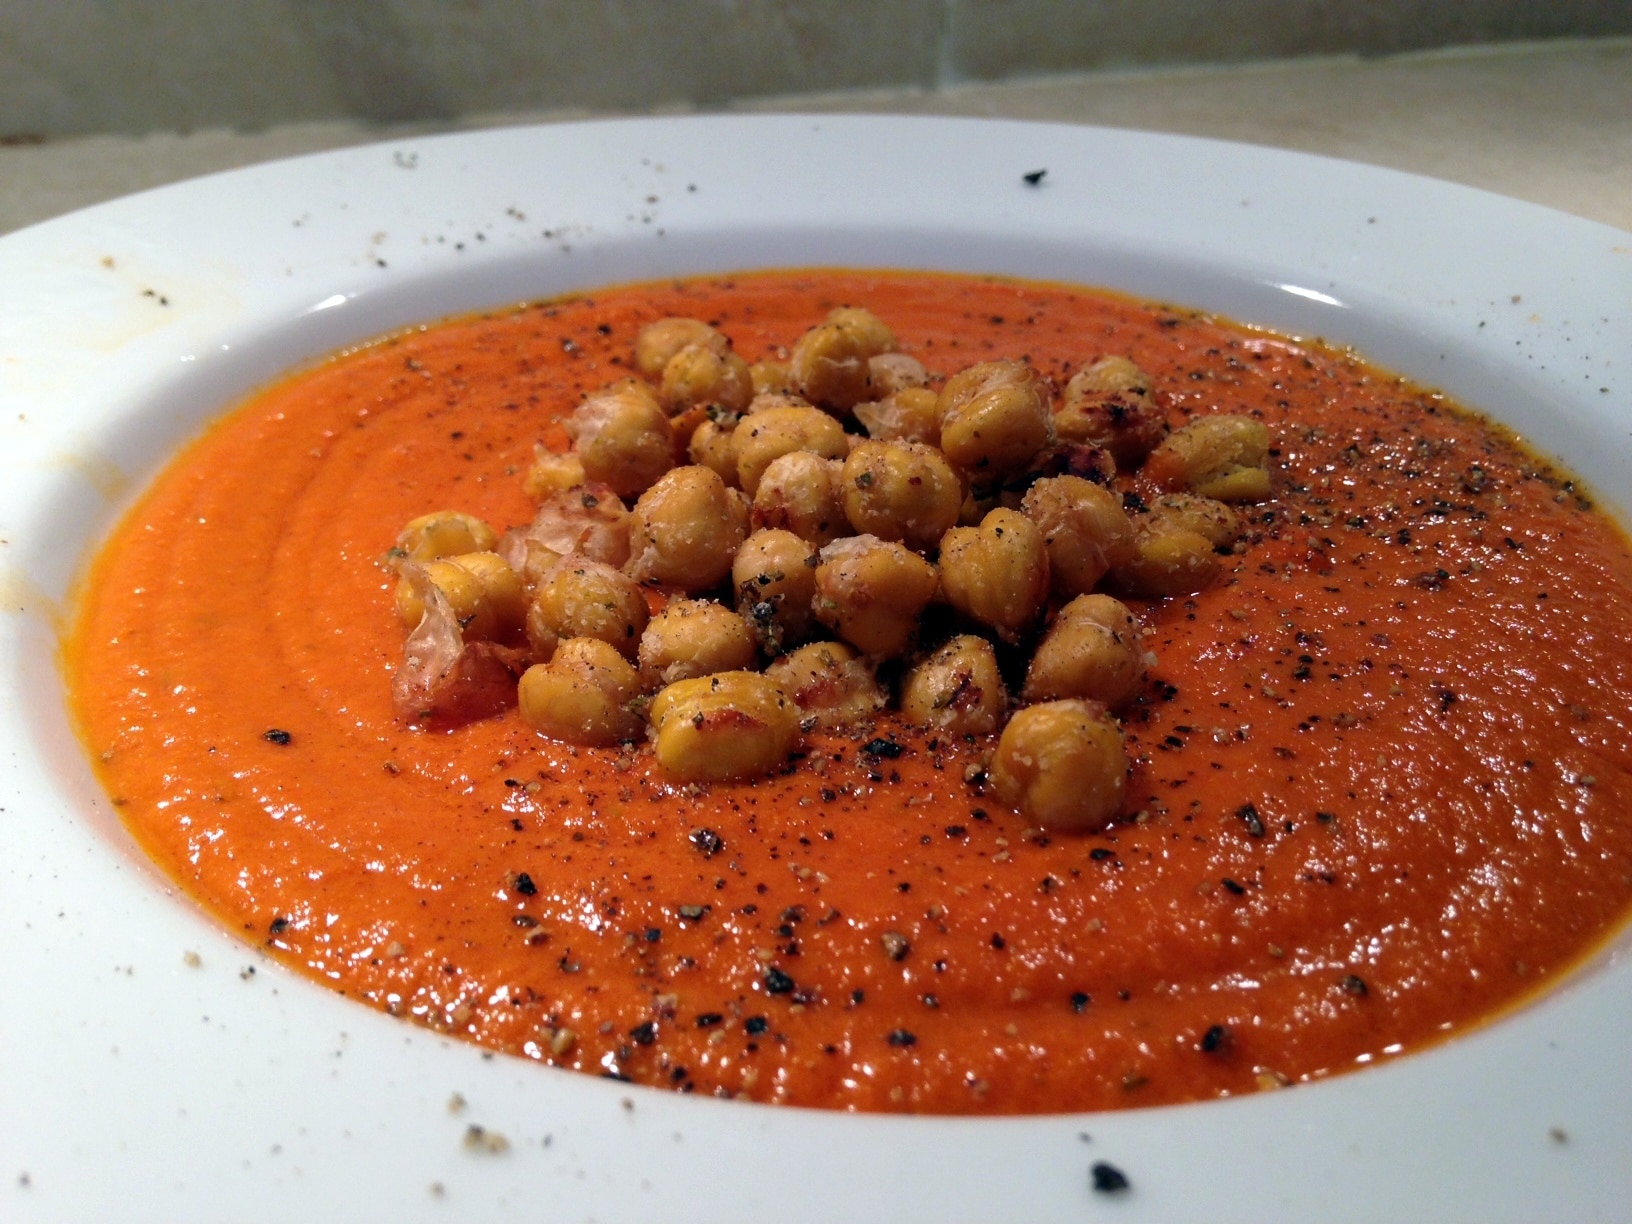 Cream of Tomato Soup with Roasted Italian Chickpea Croutons from Oh She Glows